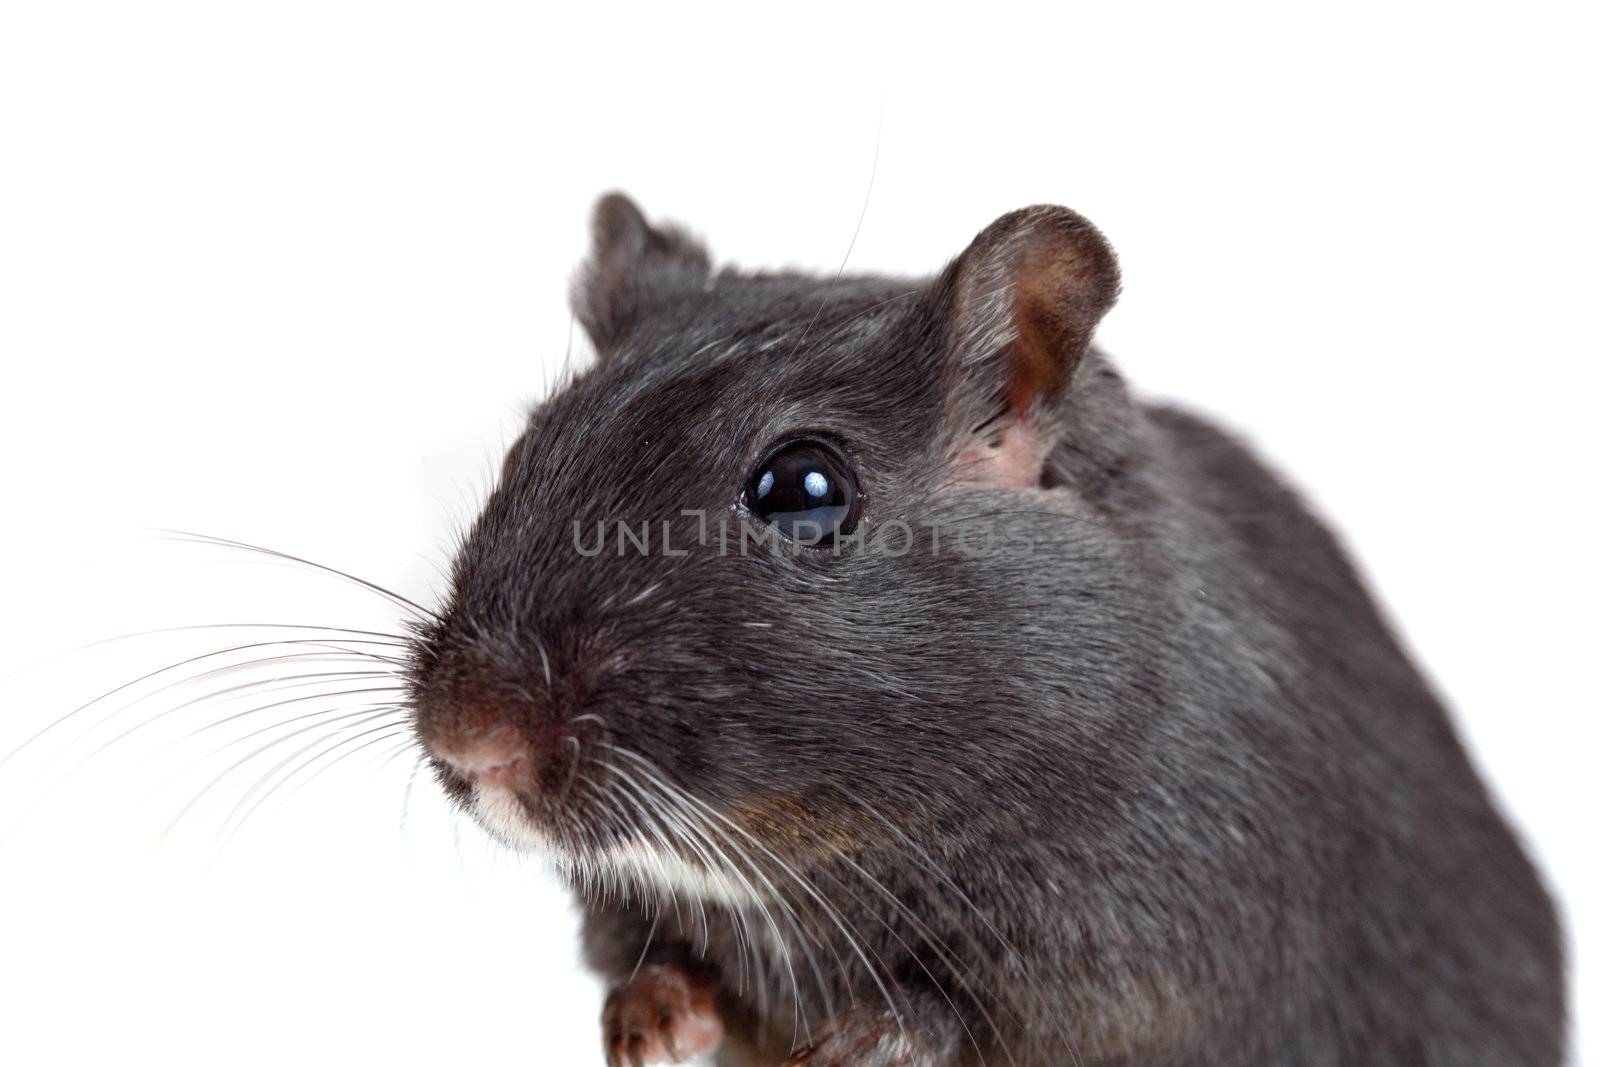 Small gerbil looking curious on white background